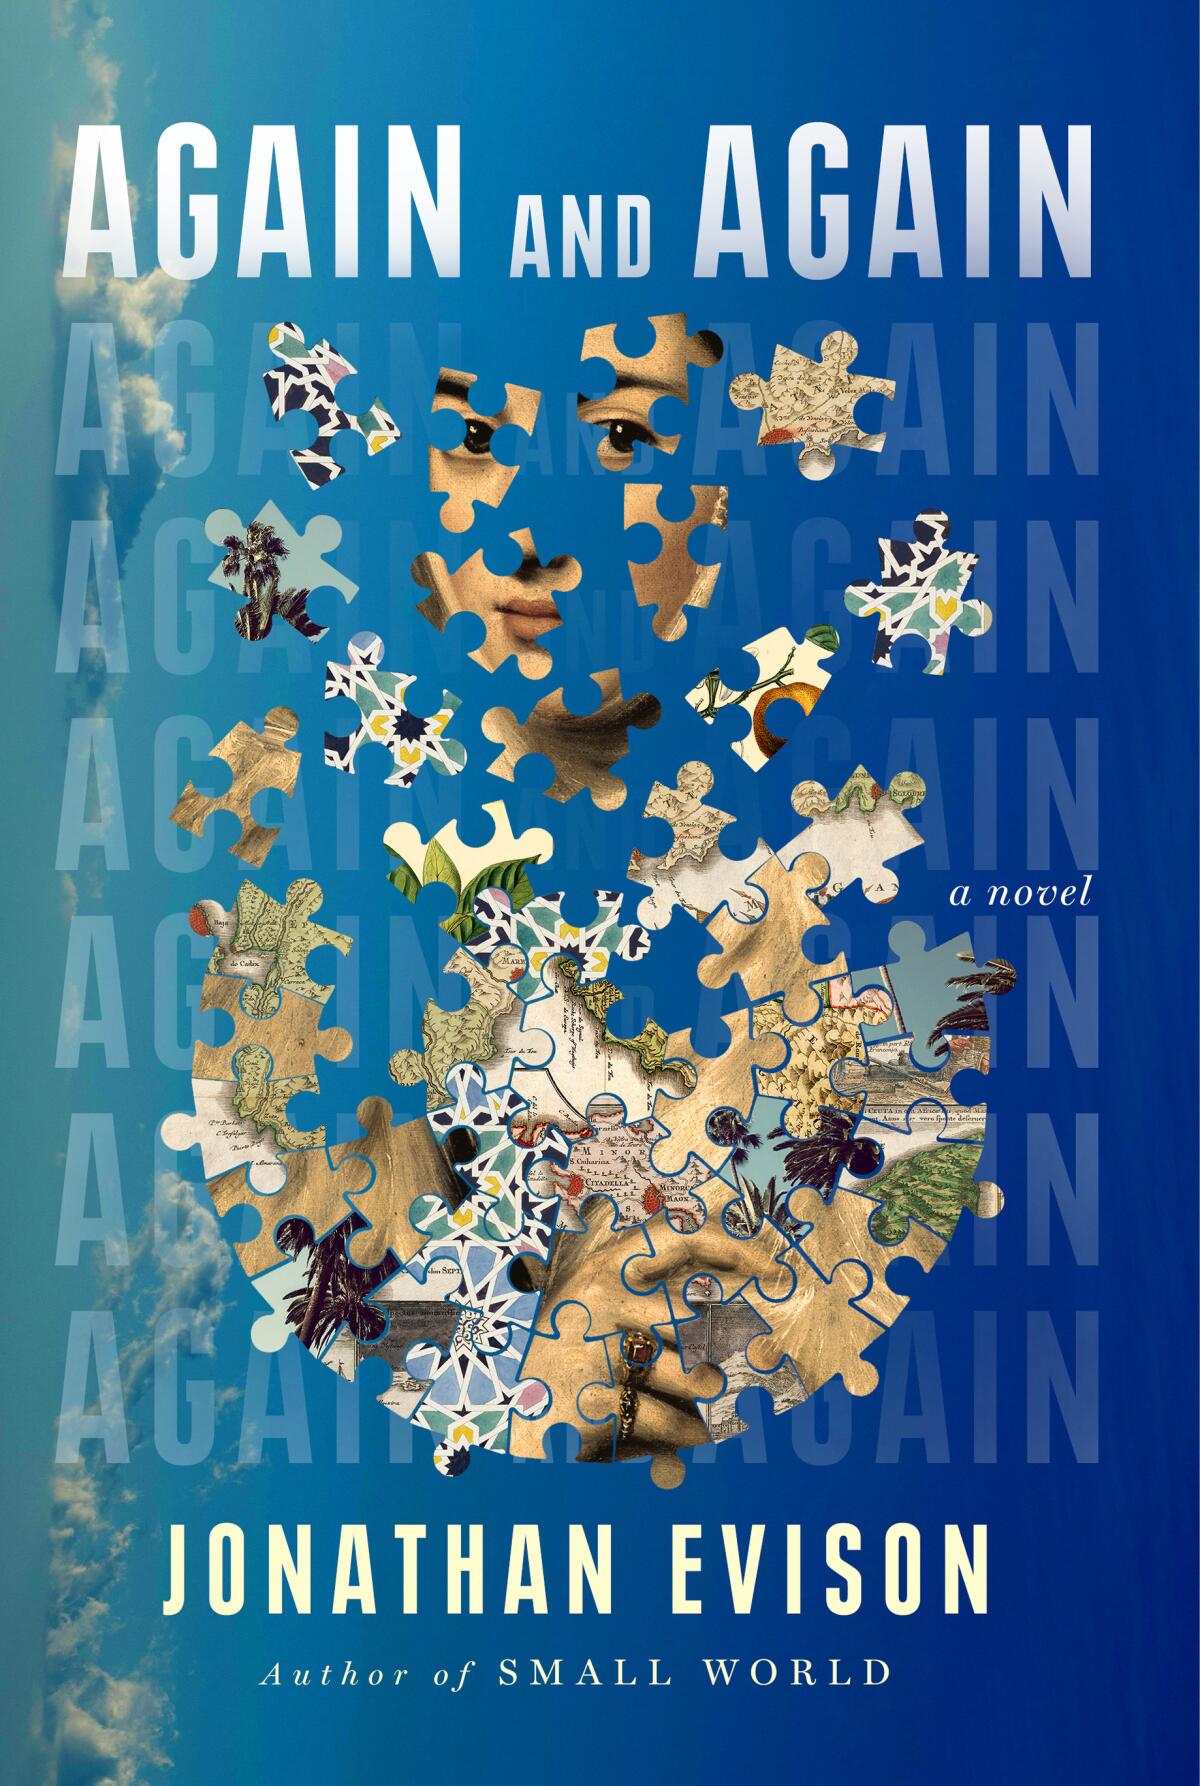 The blue book cover of "Again and Again," by Jonathan Evison, with puzzle pieces forming a woman's face and torso